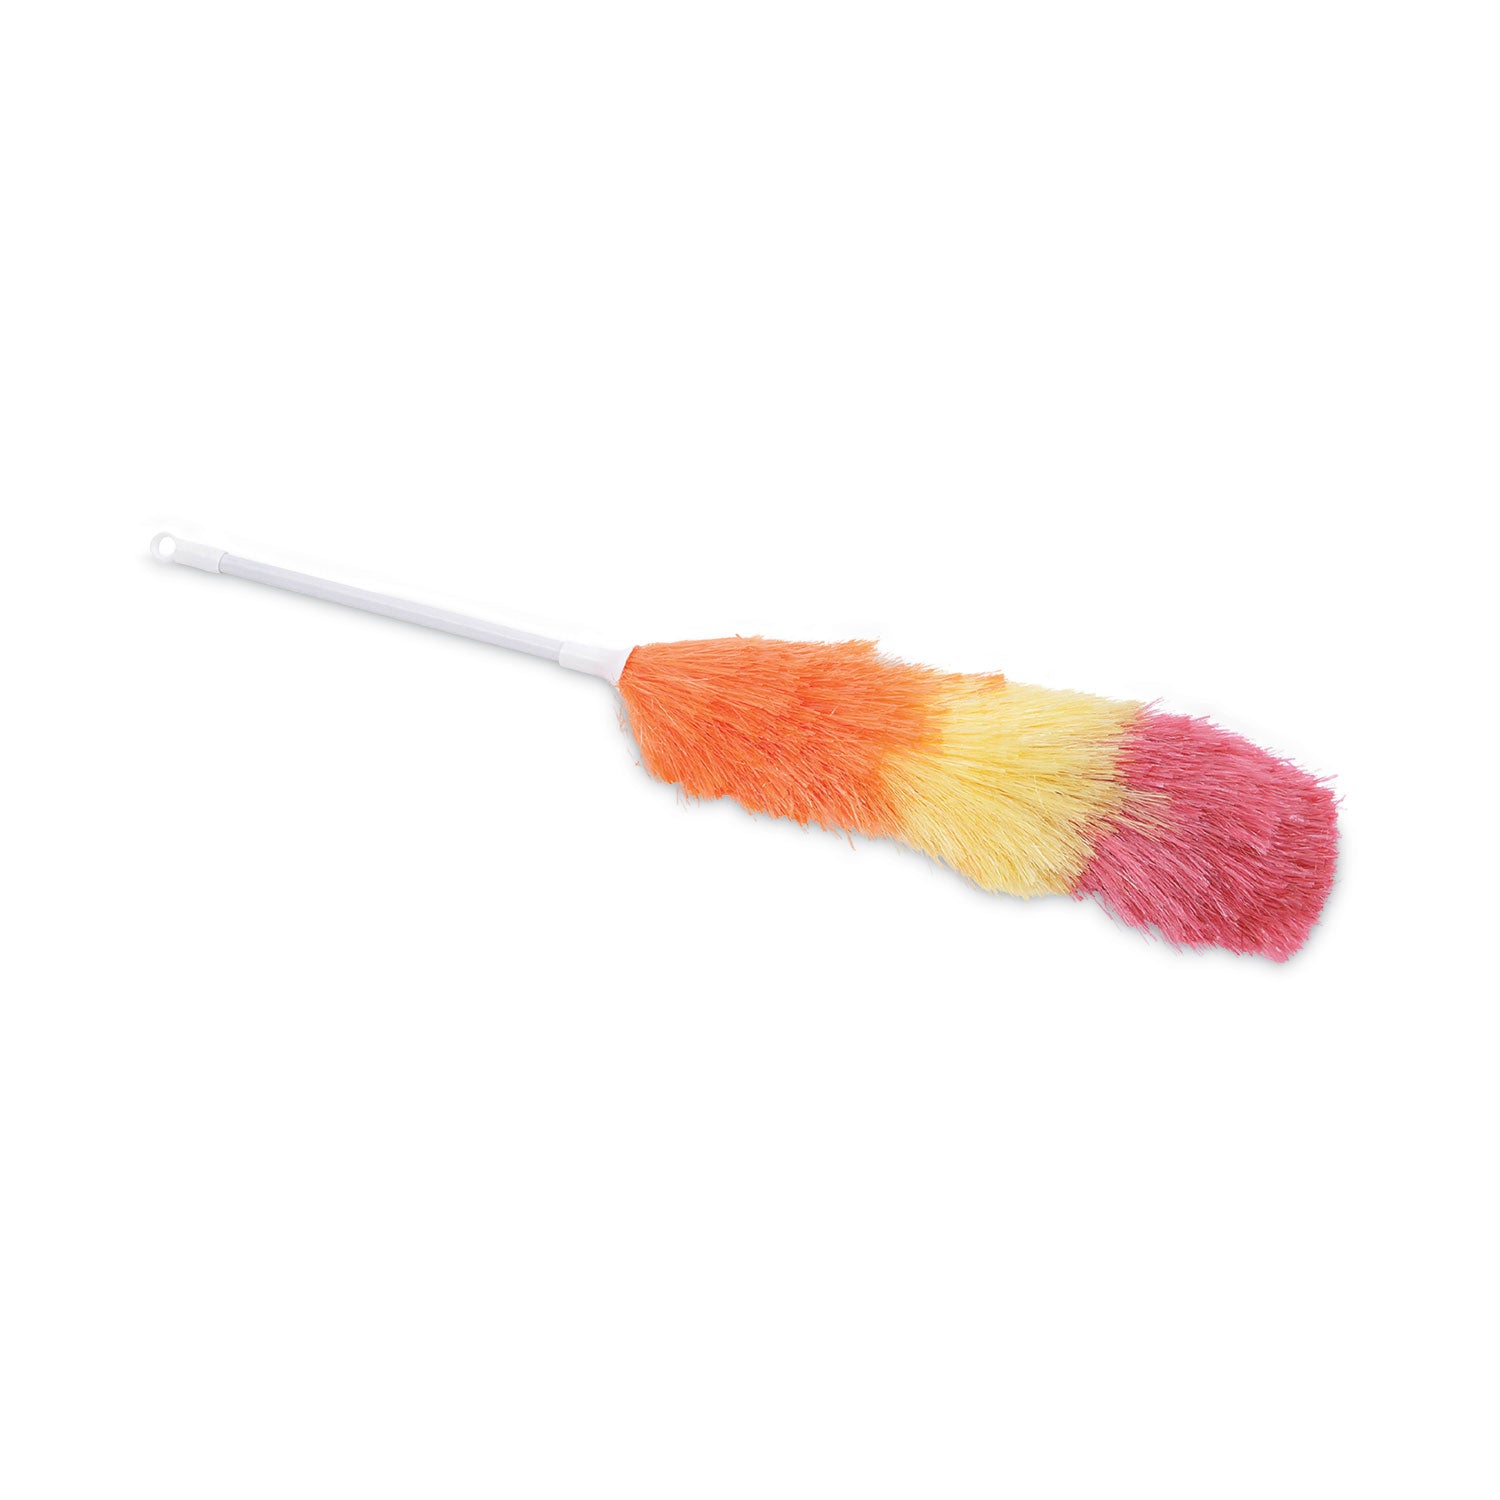 polywool-duster-w-20-plastic-handle-assorted-colors_bwk9441 - 1